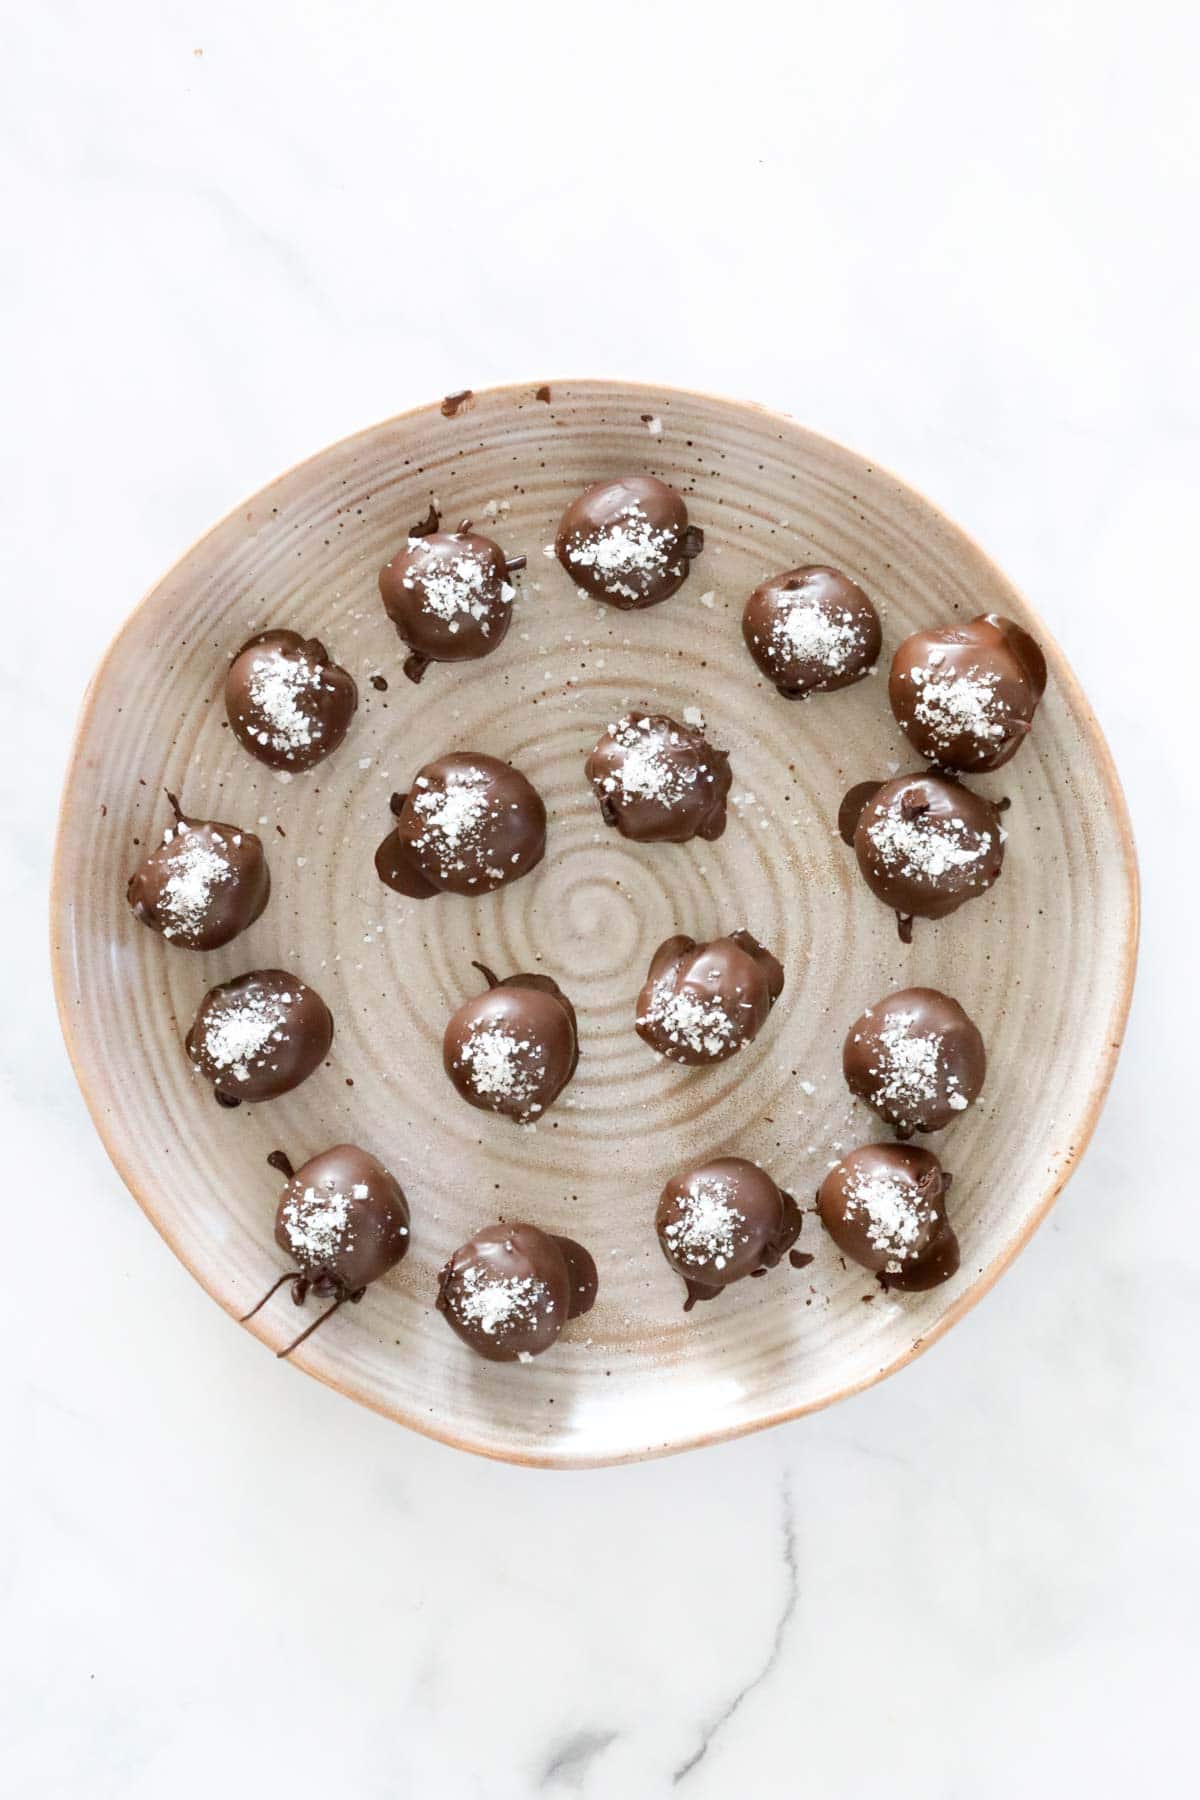 The truffles dipped in chocolate and sprinkled with sea salt on a plate.